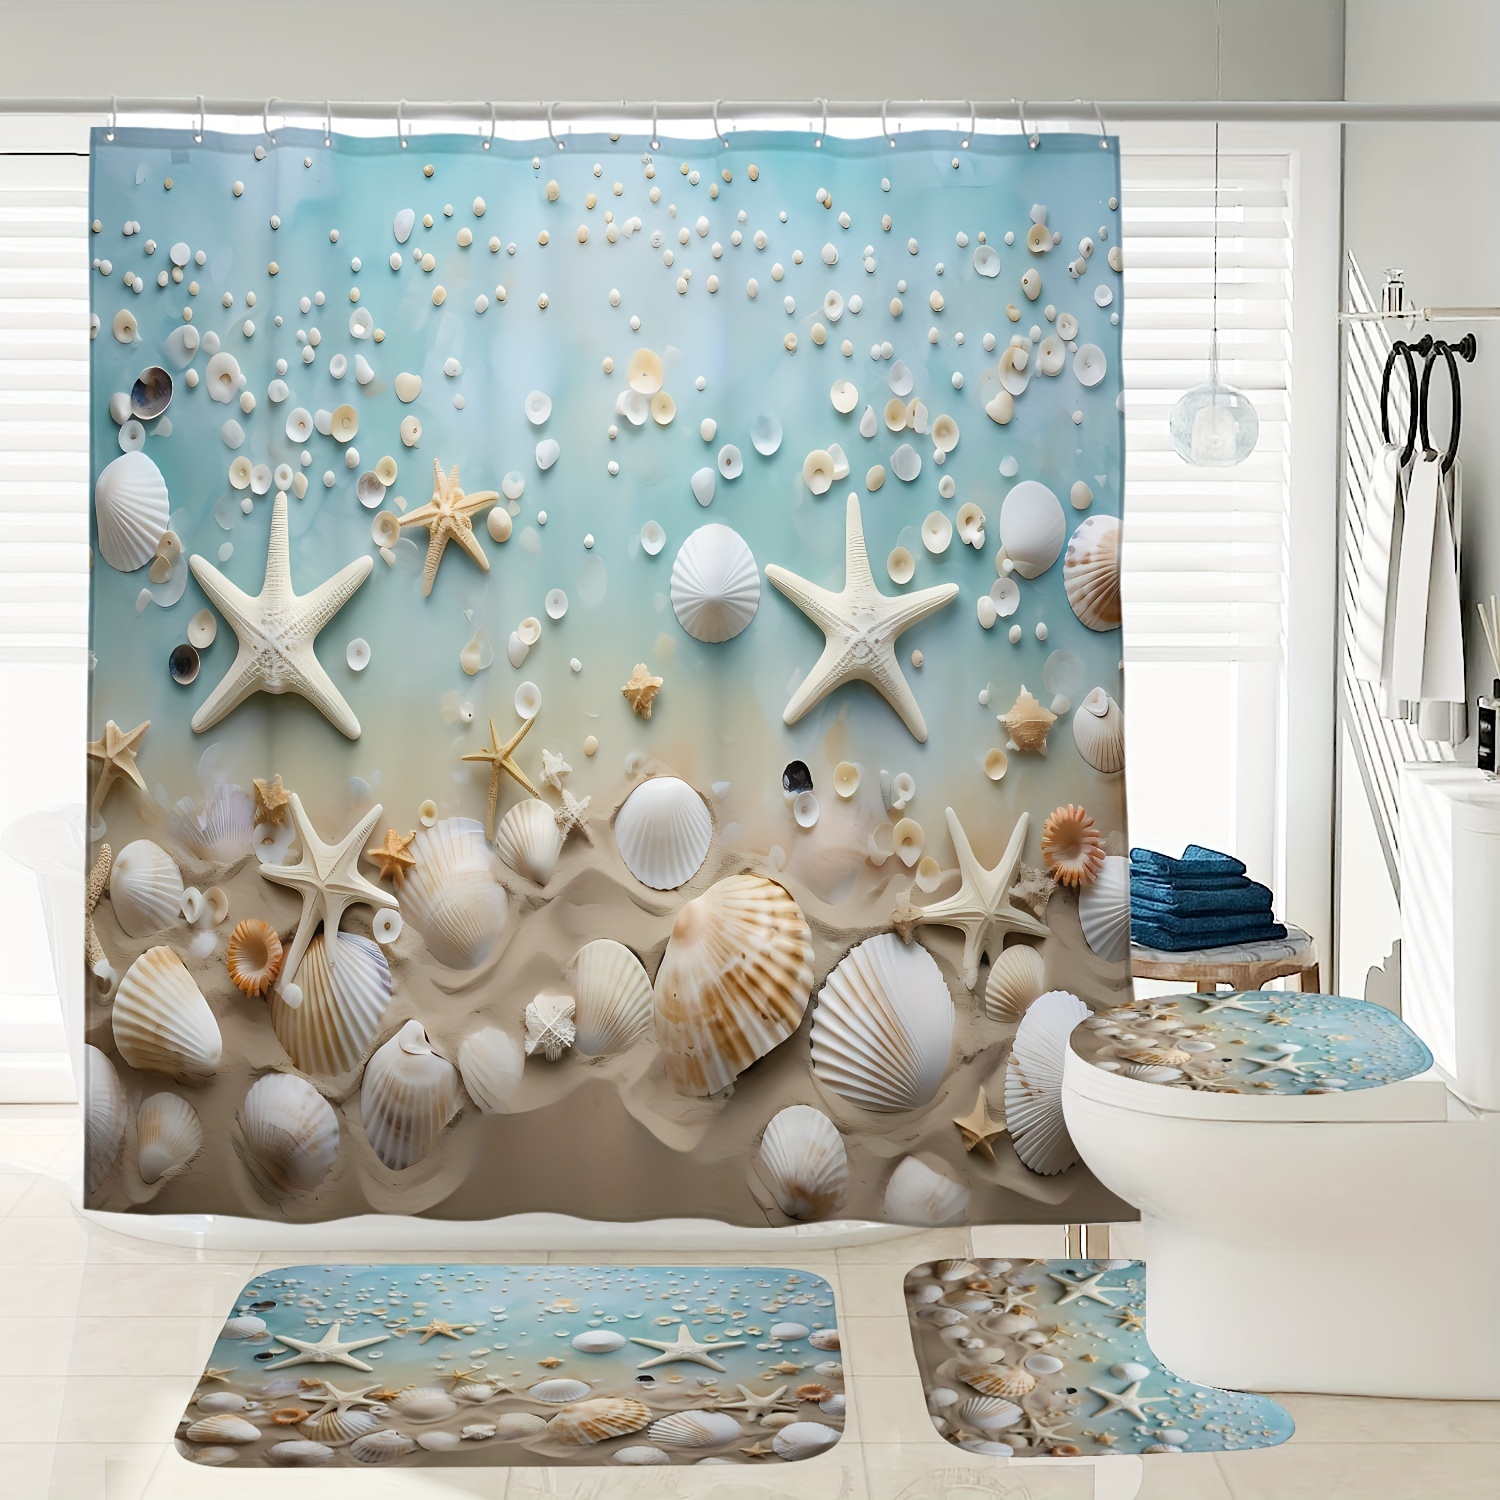 

1/3/4pcs Nautical Bathroom Set With Shell & Starfish Pattern, Digital Printed Waterproof Shower Curtain & Toilet Seat Cover, Includes Bath Mat And 12 Plastic Hooks, Beach Themed Bathroom Decor